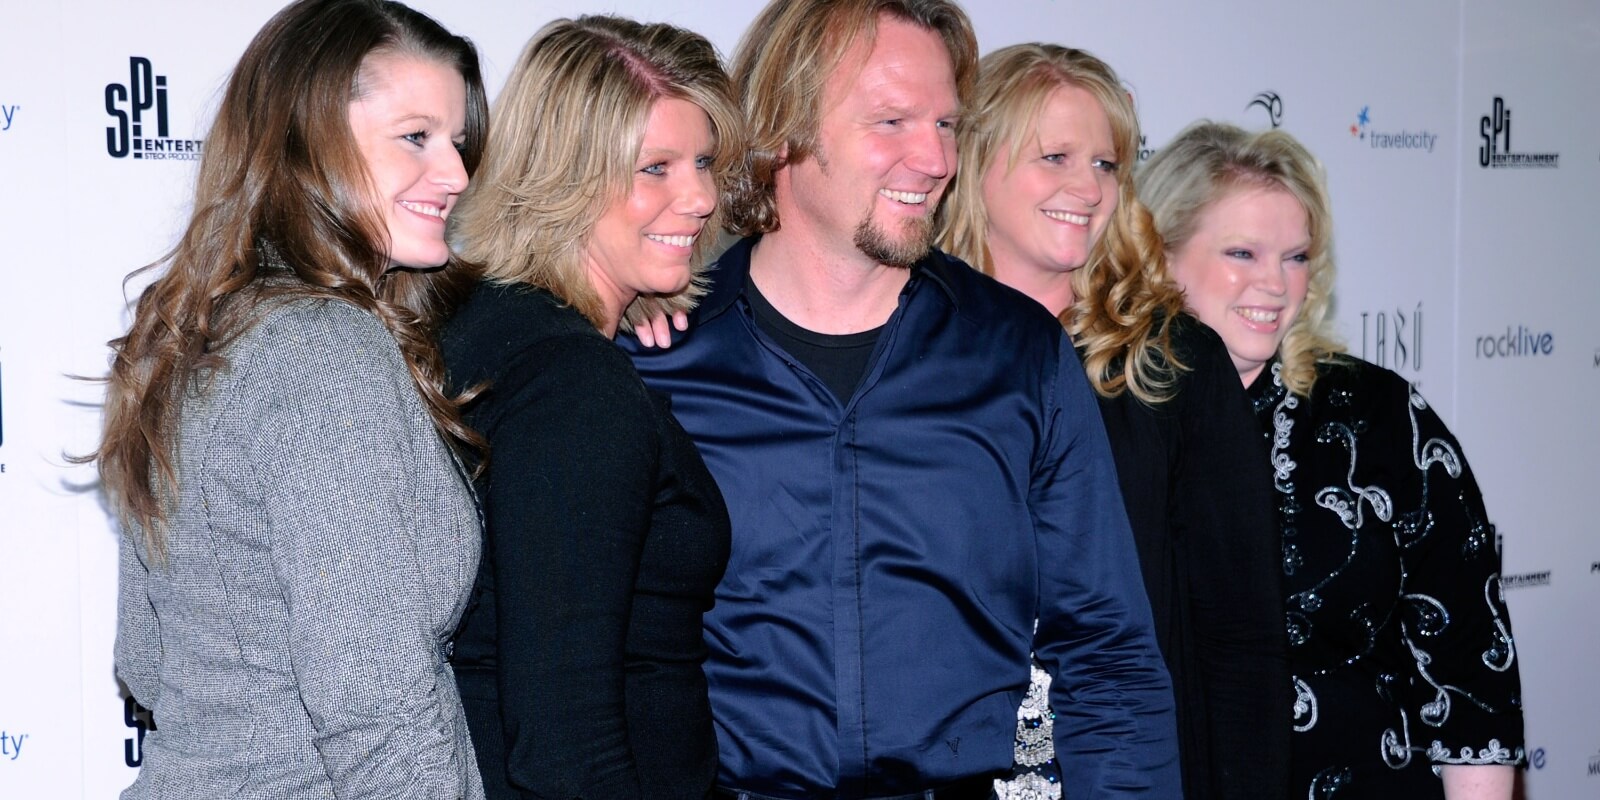 The cast of TLC's 'Sister Wives' photographed in 2012.